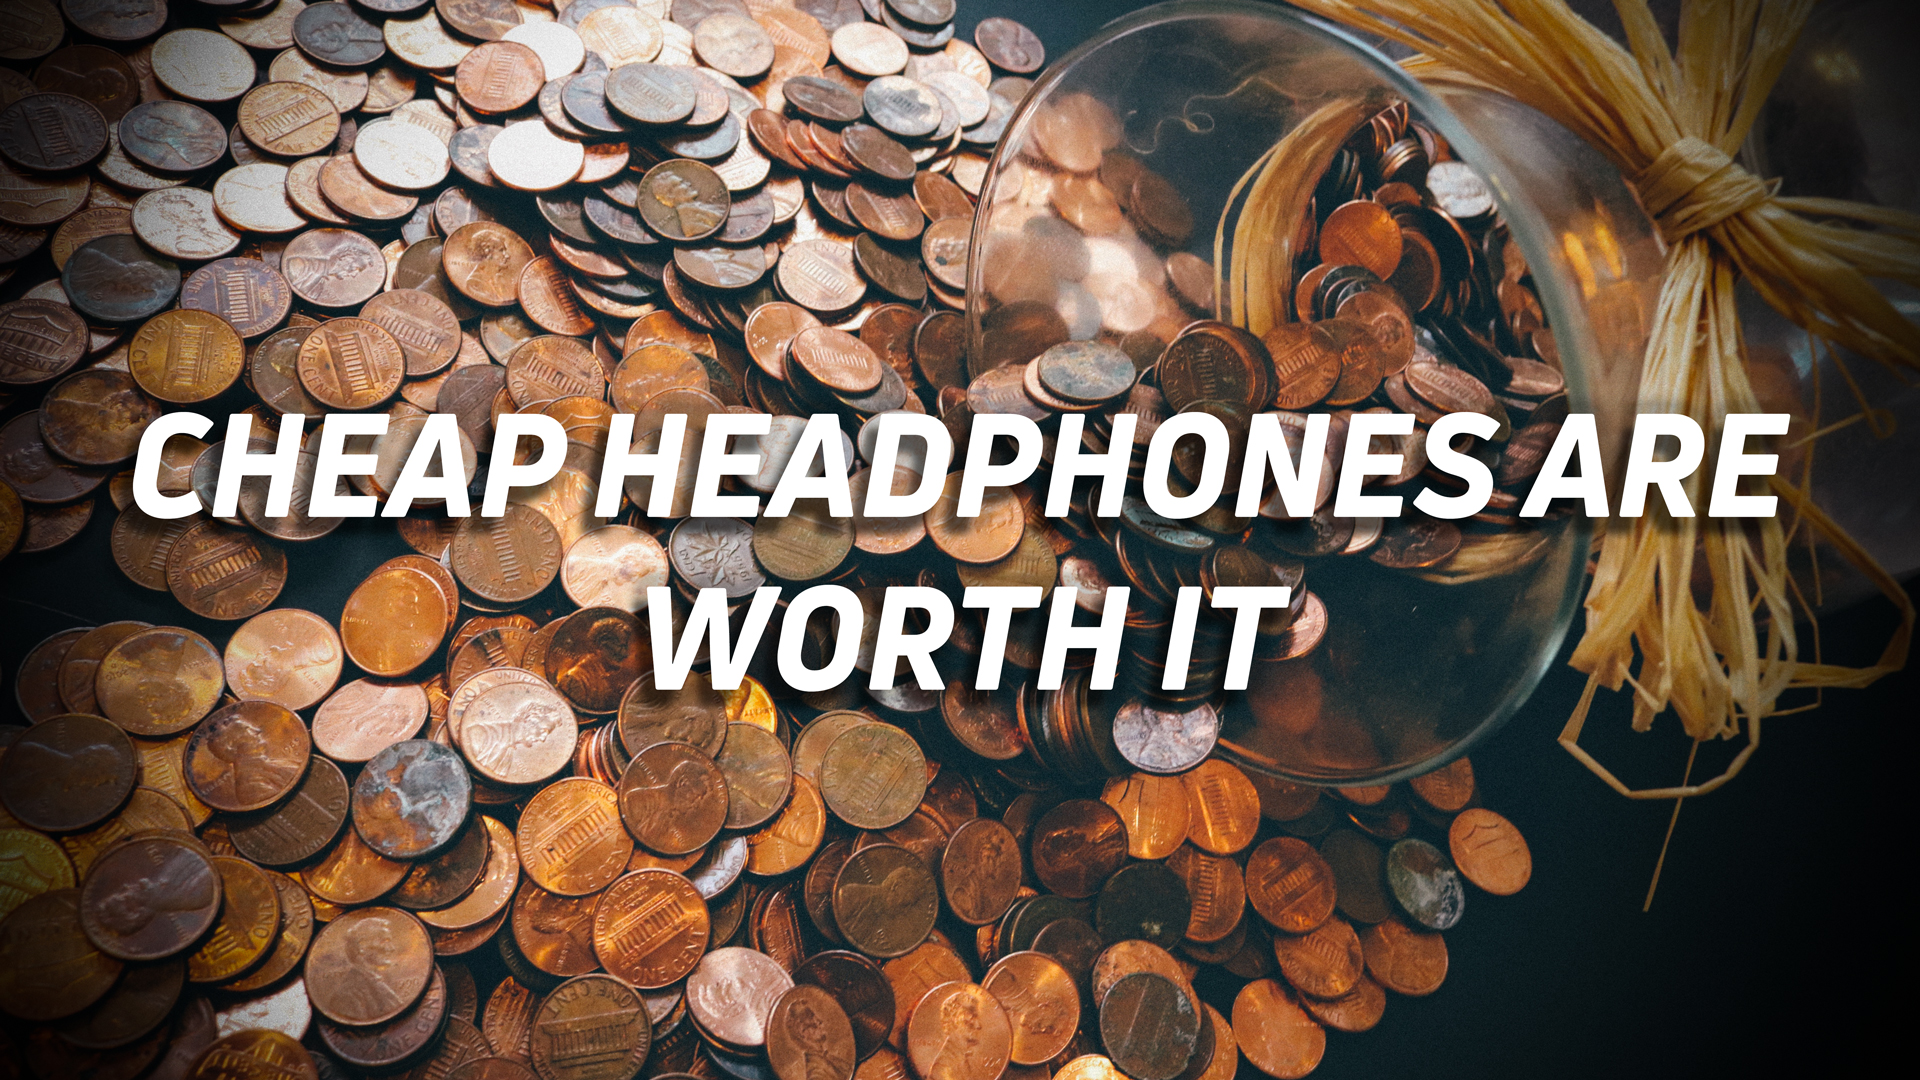 A splash of pennies and low-value coins in the background, with the text "CHEAP HEADPHONES ARE WORTH IT" overlaid on the image.